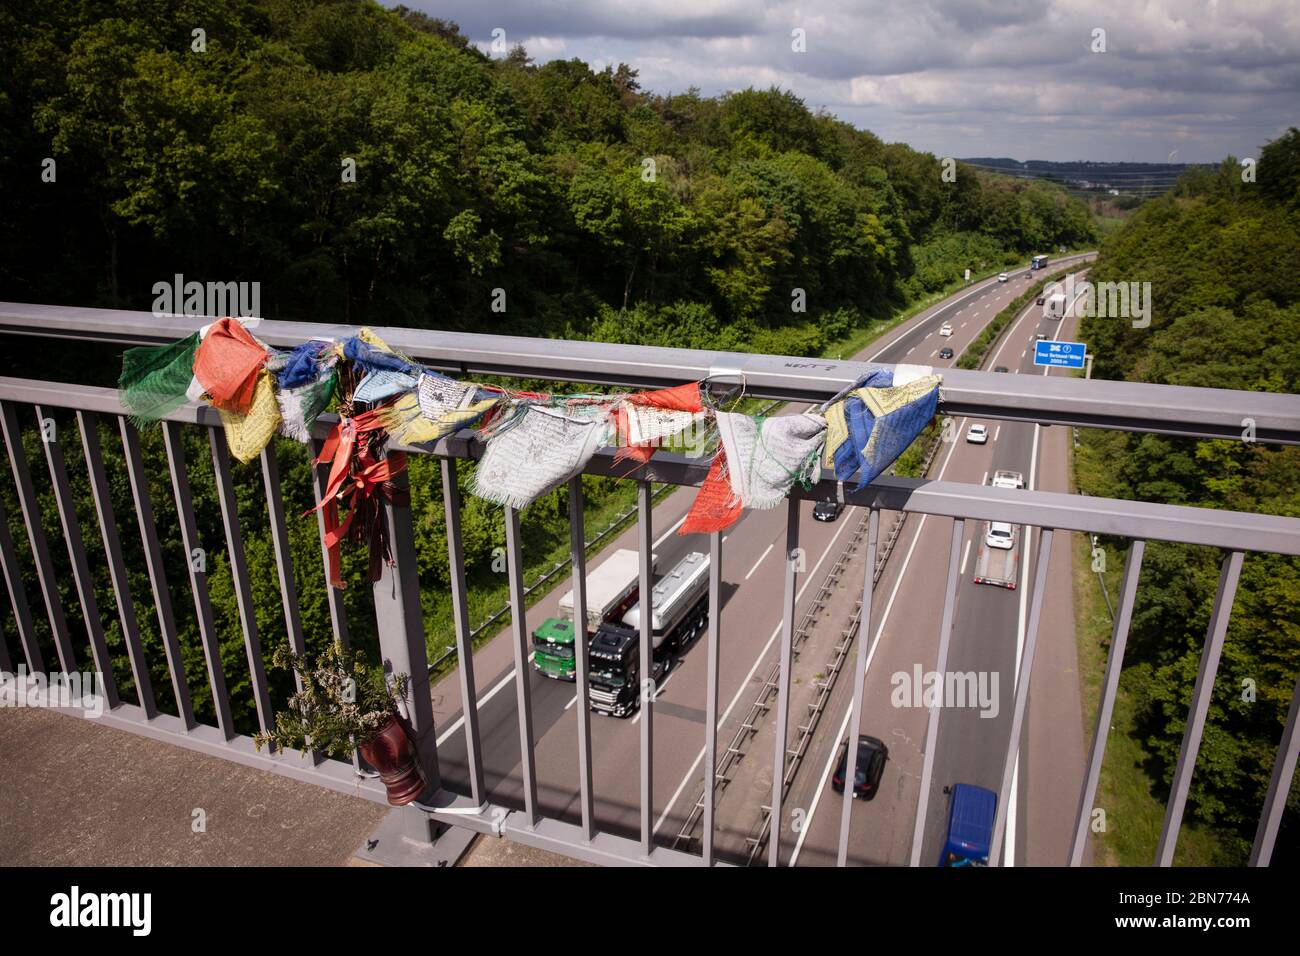 buddhist flags in memory of a man who committed suicide by jumping from this bridge over the A45 Autobahn south of Dortmund, North Rhine-Westphalia, G Stock Photo